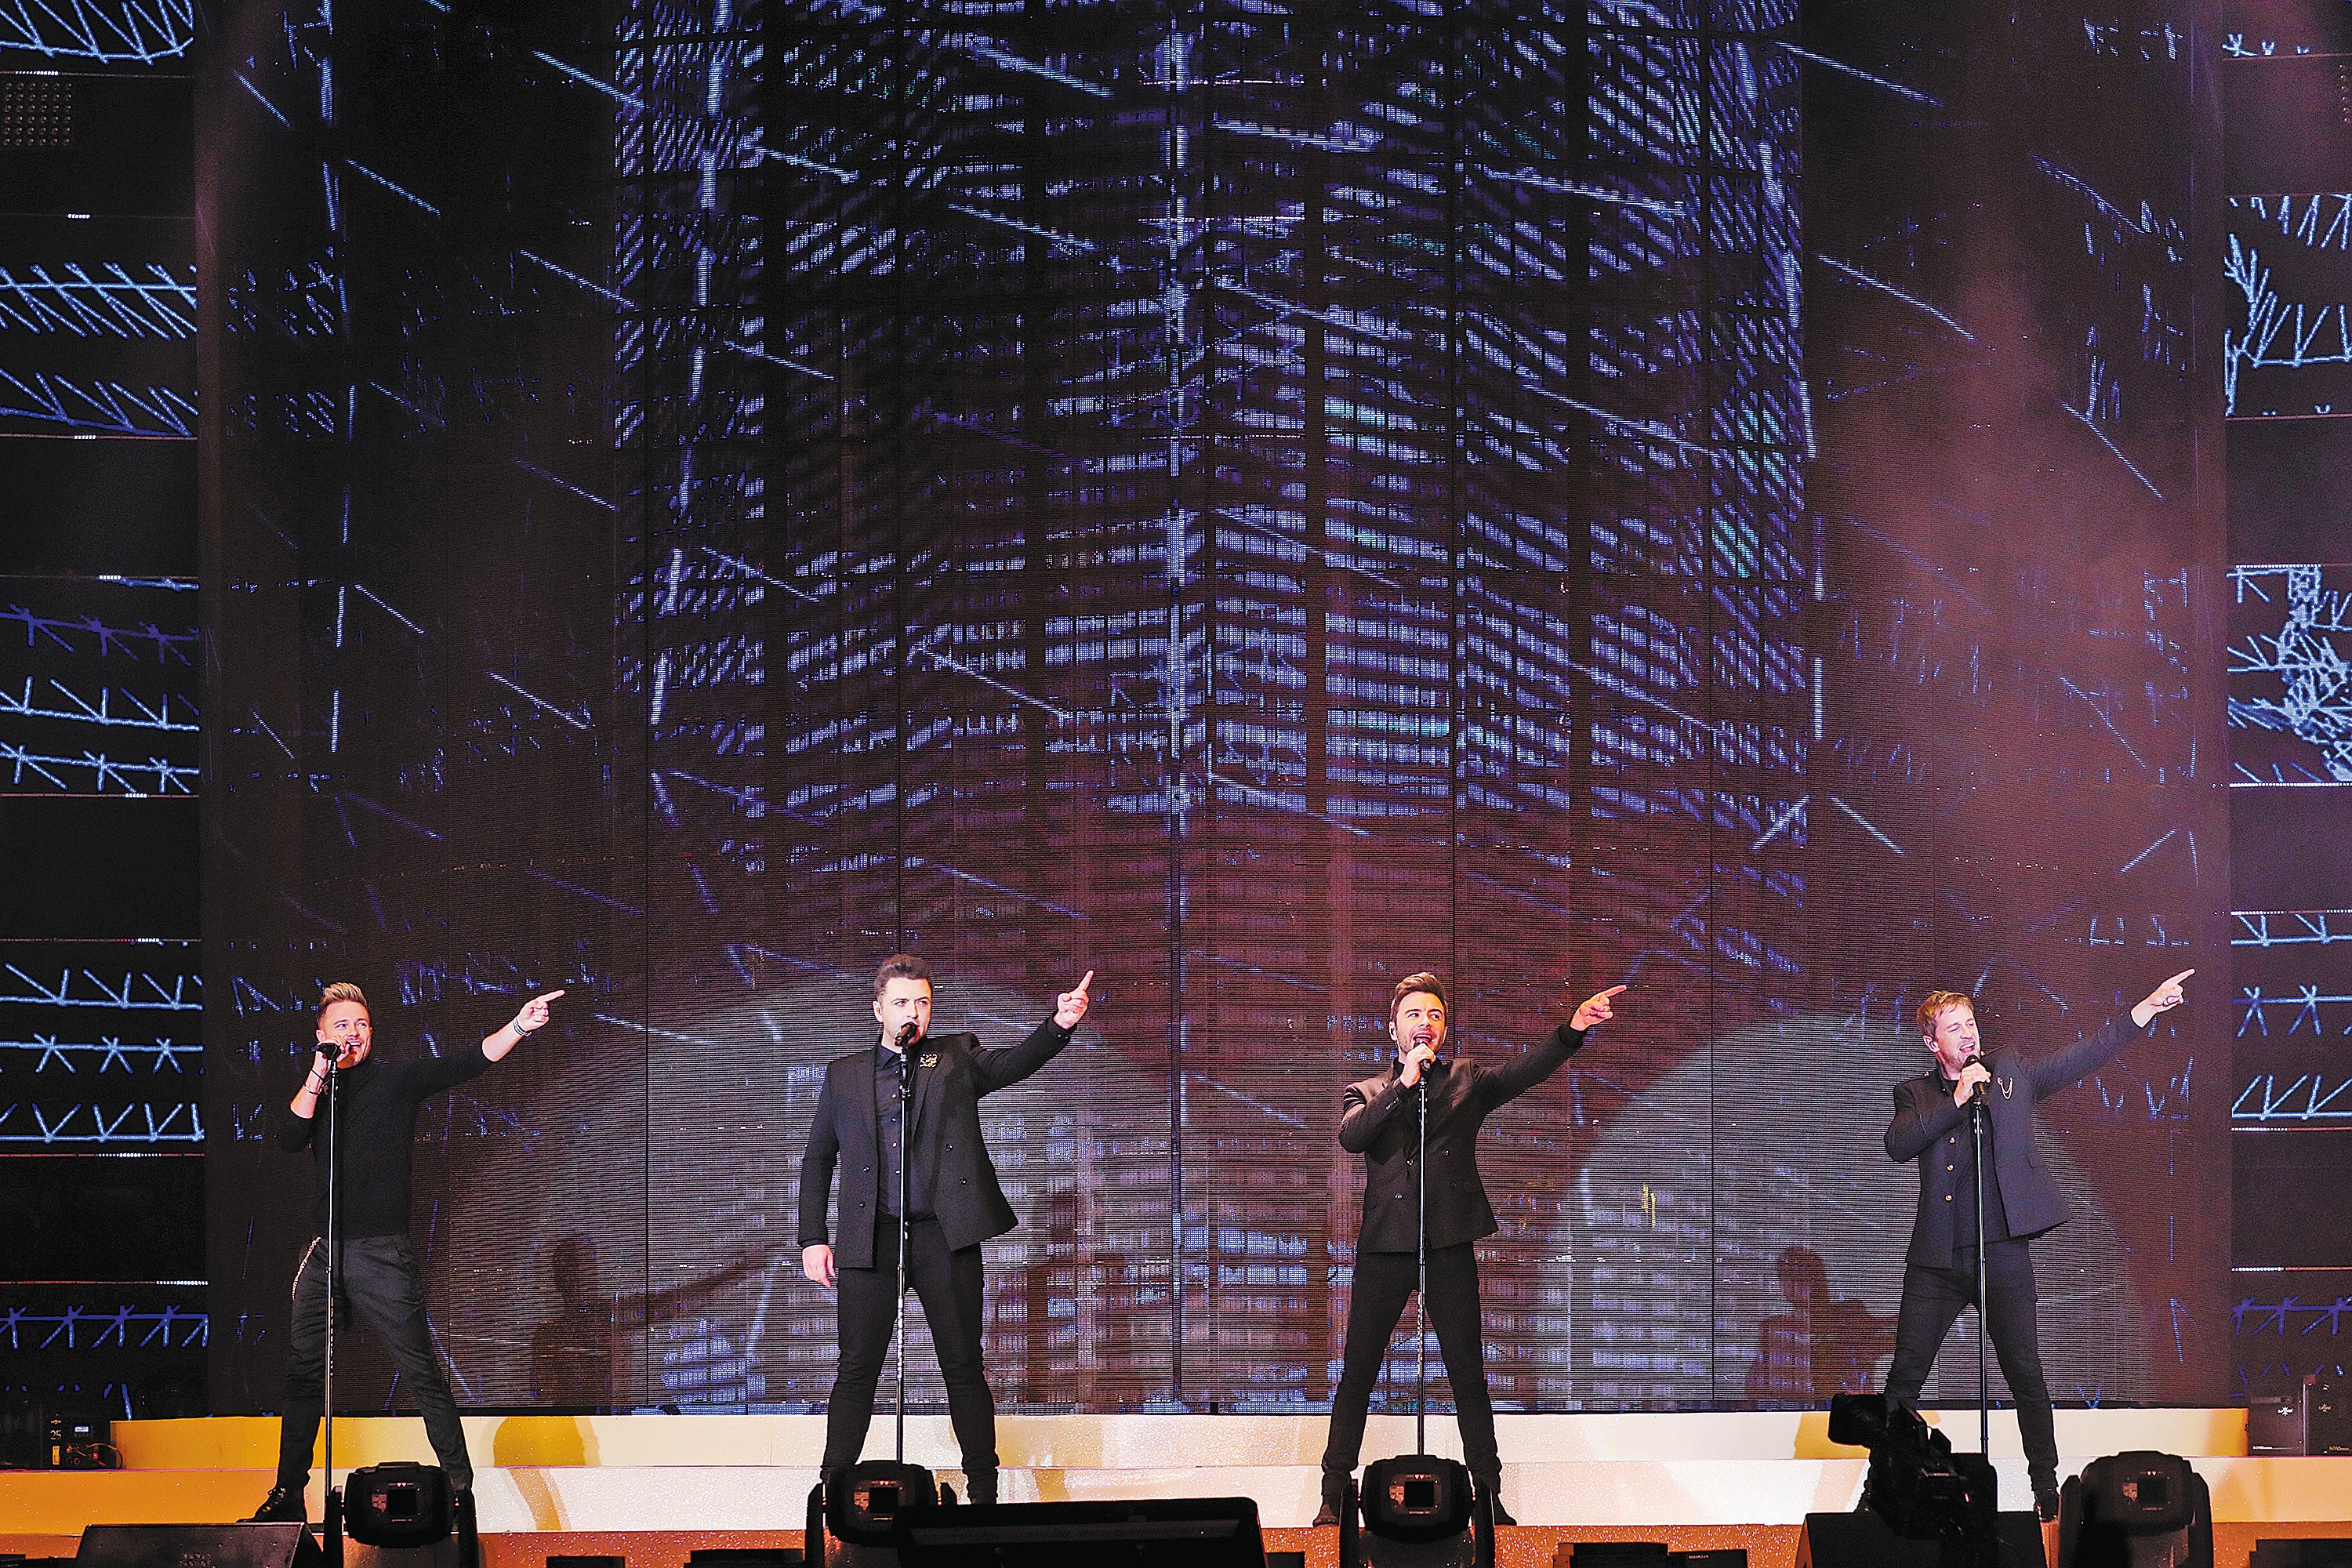 Performing at a music awards ceremony in Macao in December 2019